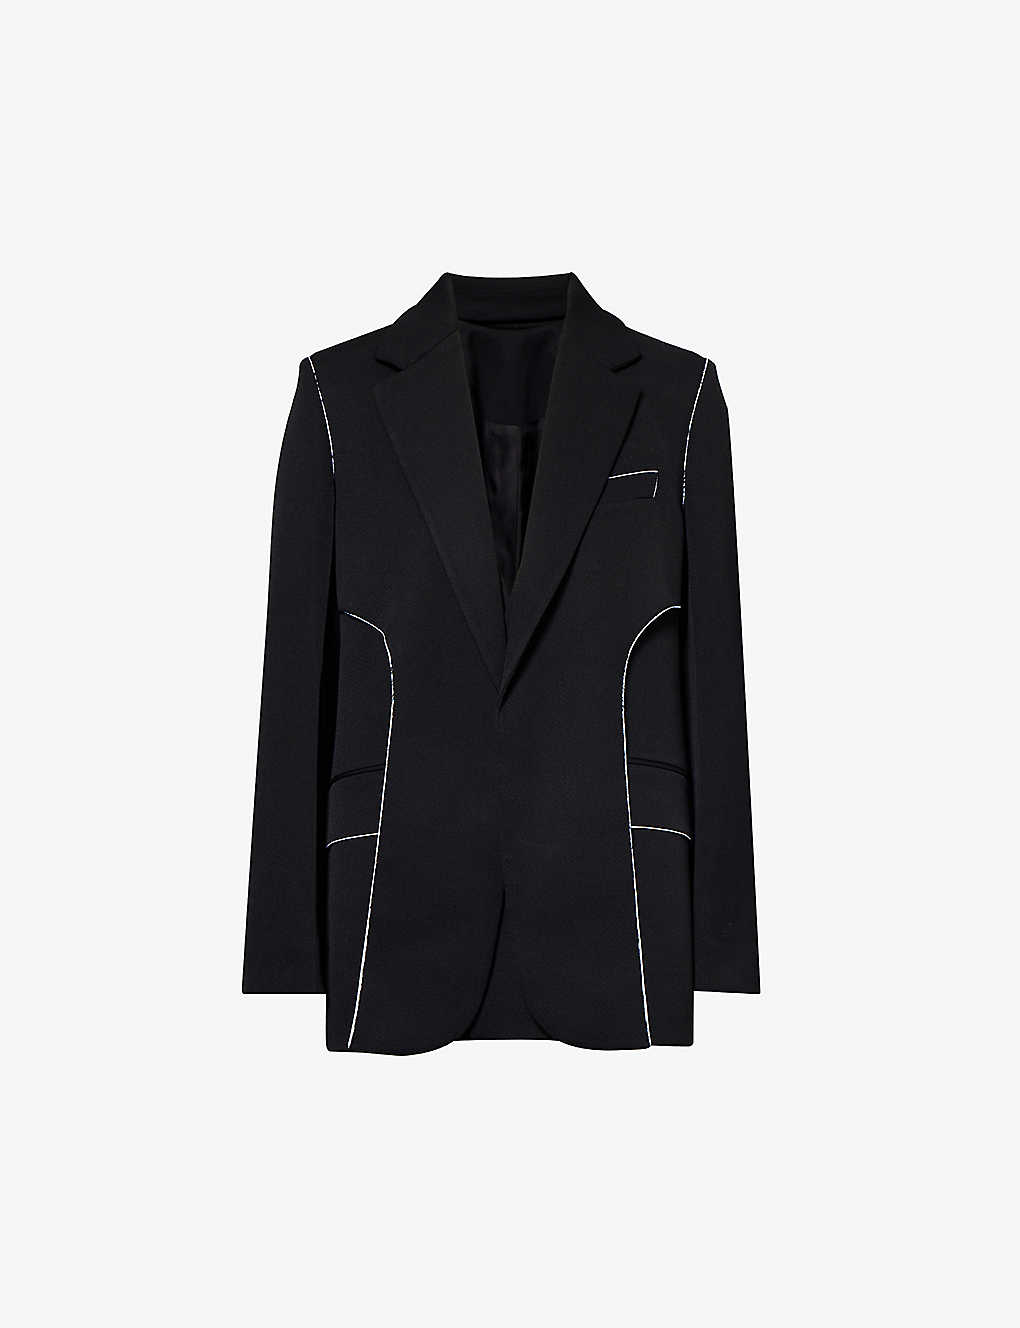 Victoria Beckham Womens Black Contrast-piping Notched-lapel Woven Blazer